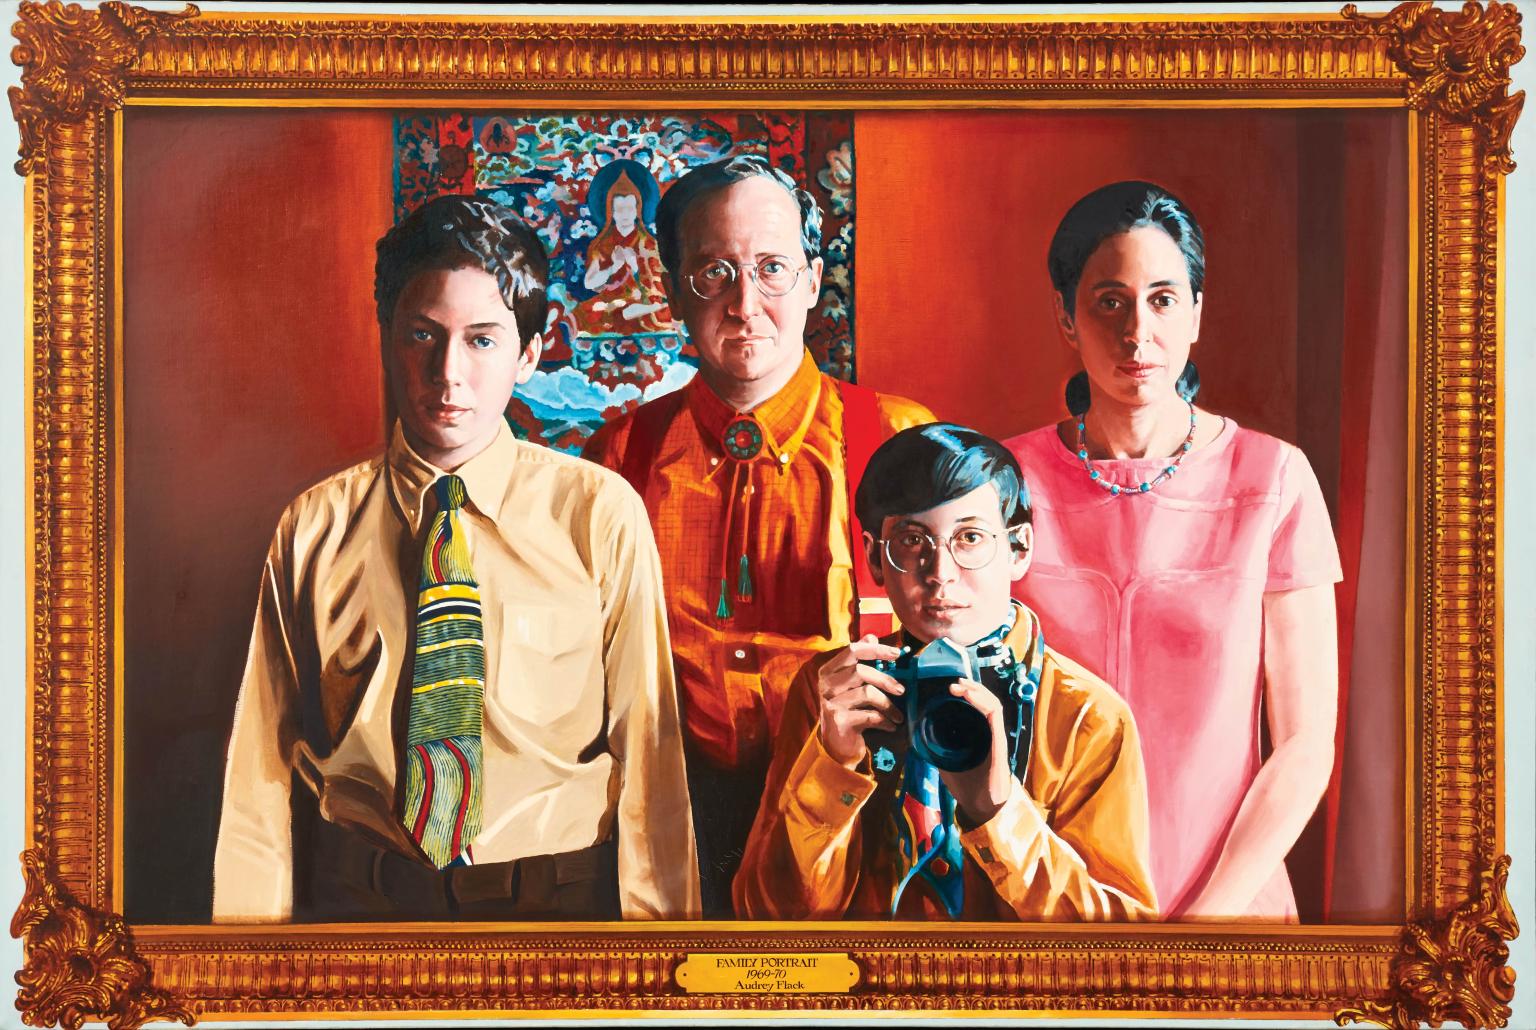 Photorealist painting of woman, man, and two young boys, one of whom holds camera, standing in front of a picture of a meditating god and looking at the viewer. 